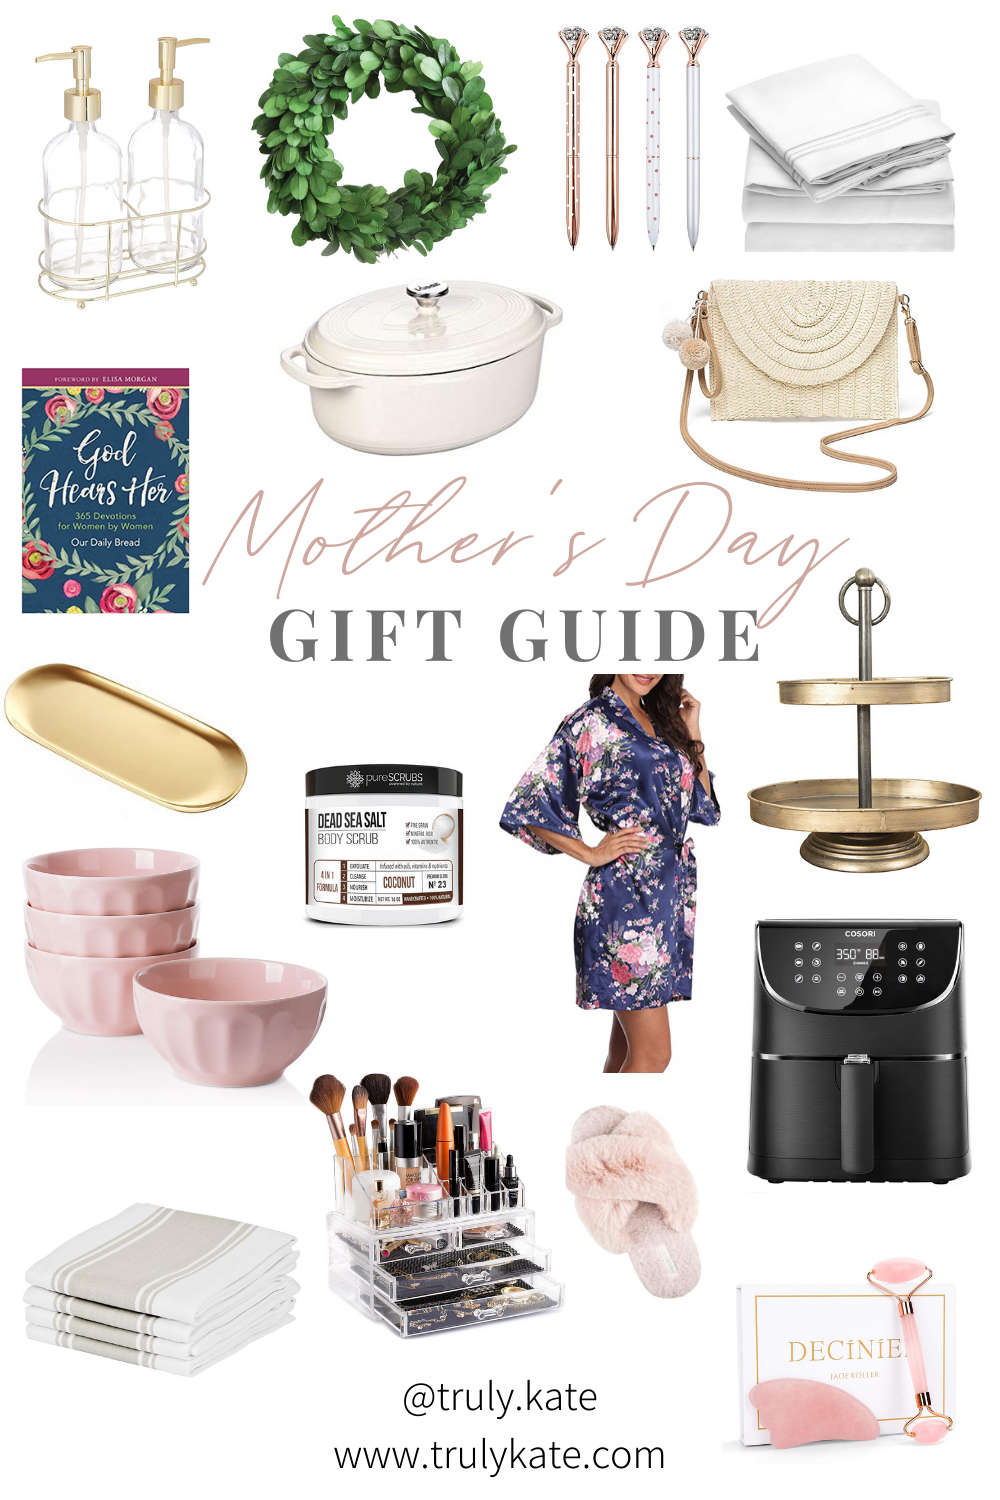 gift ideas for mom mother in law grandma sister